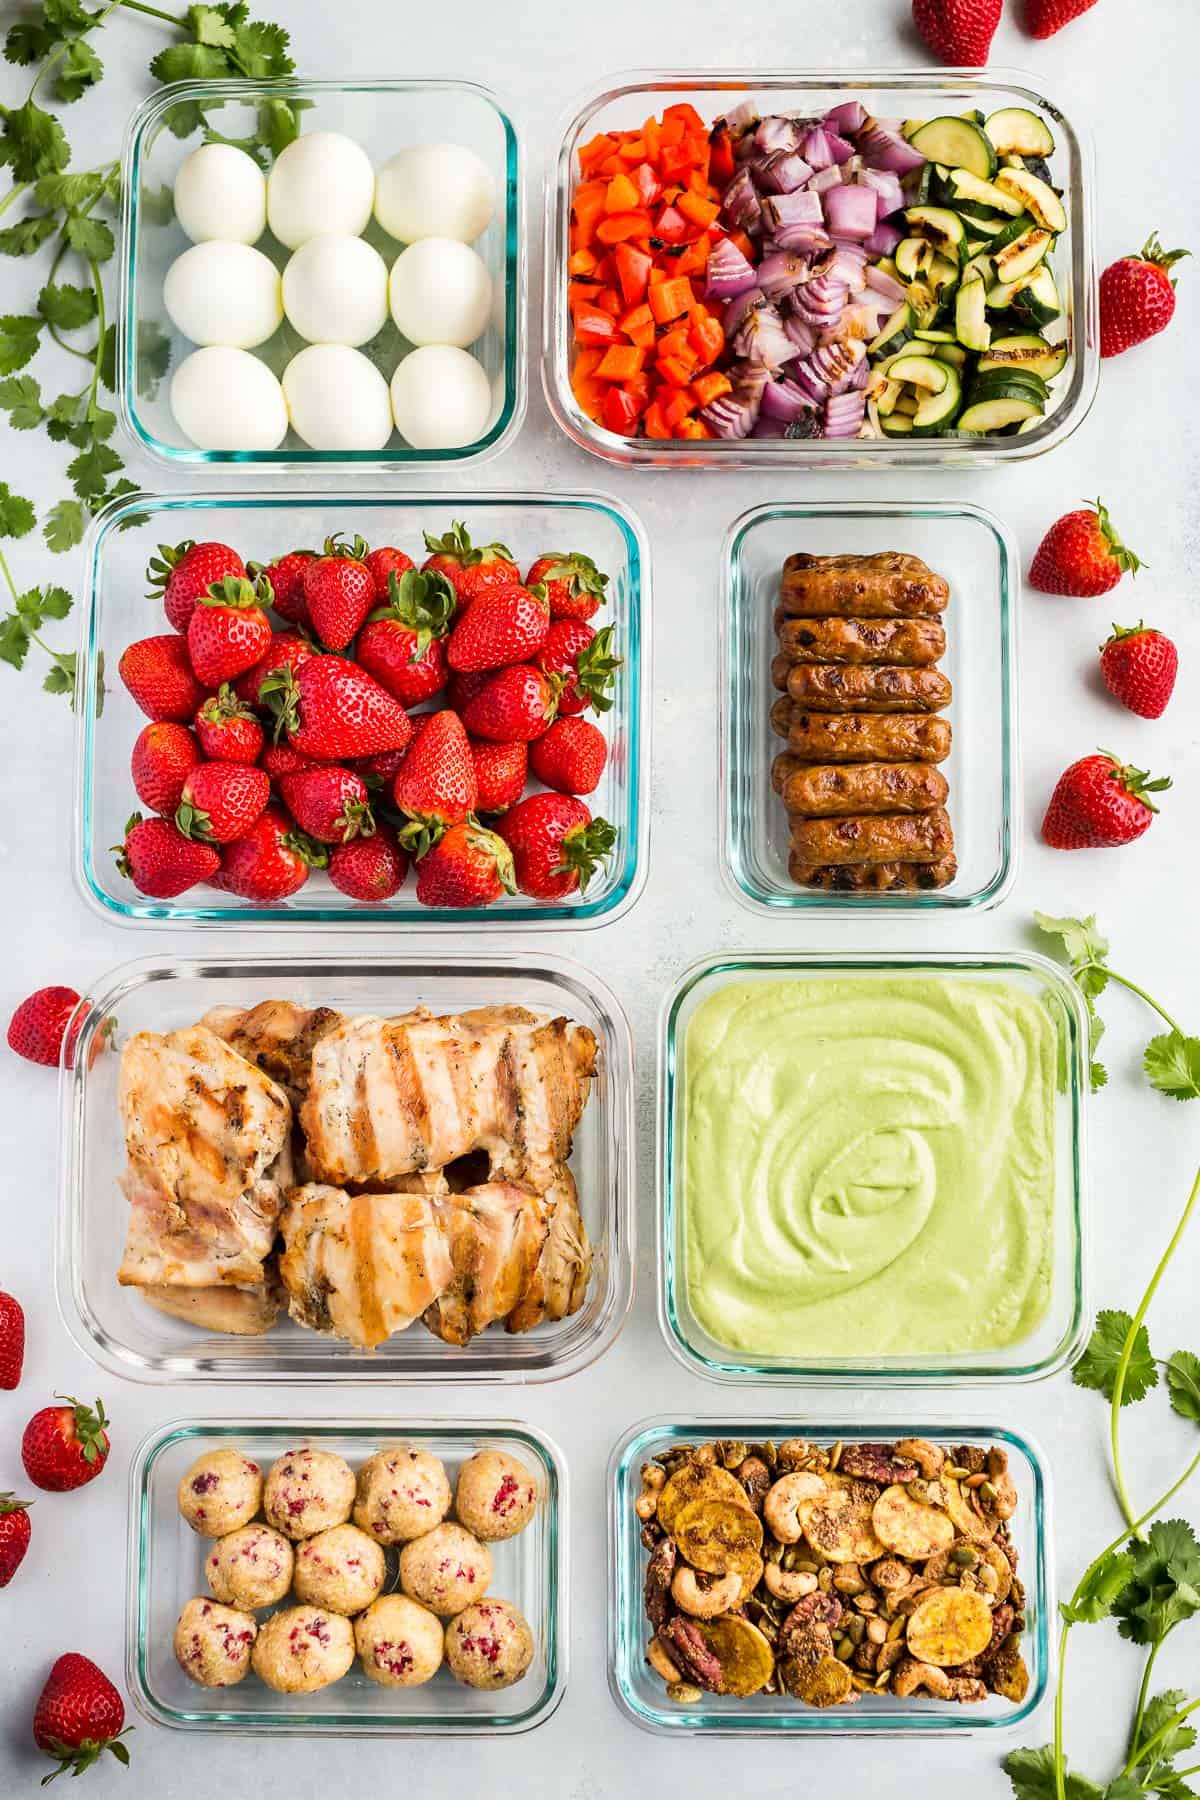 Glass meal prep containers filled with hardboiled eggs, grilled mixed veggies, strawberries, breakfast sausages, grilled chicken, energy bites, snack mix, and hummus.